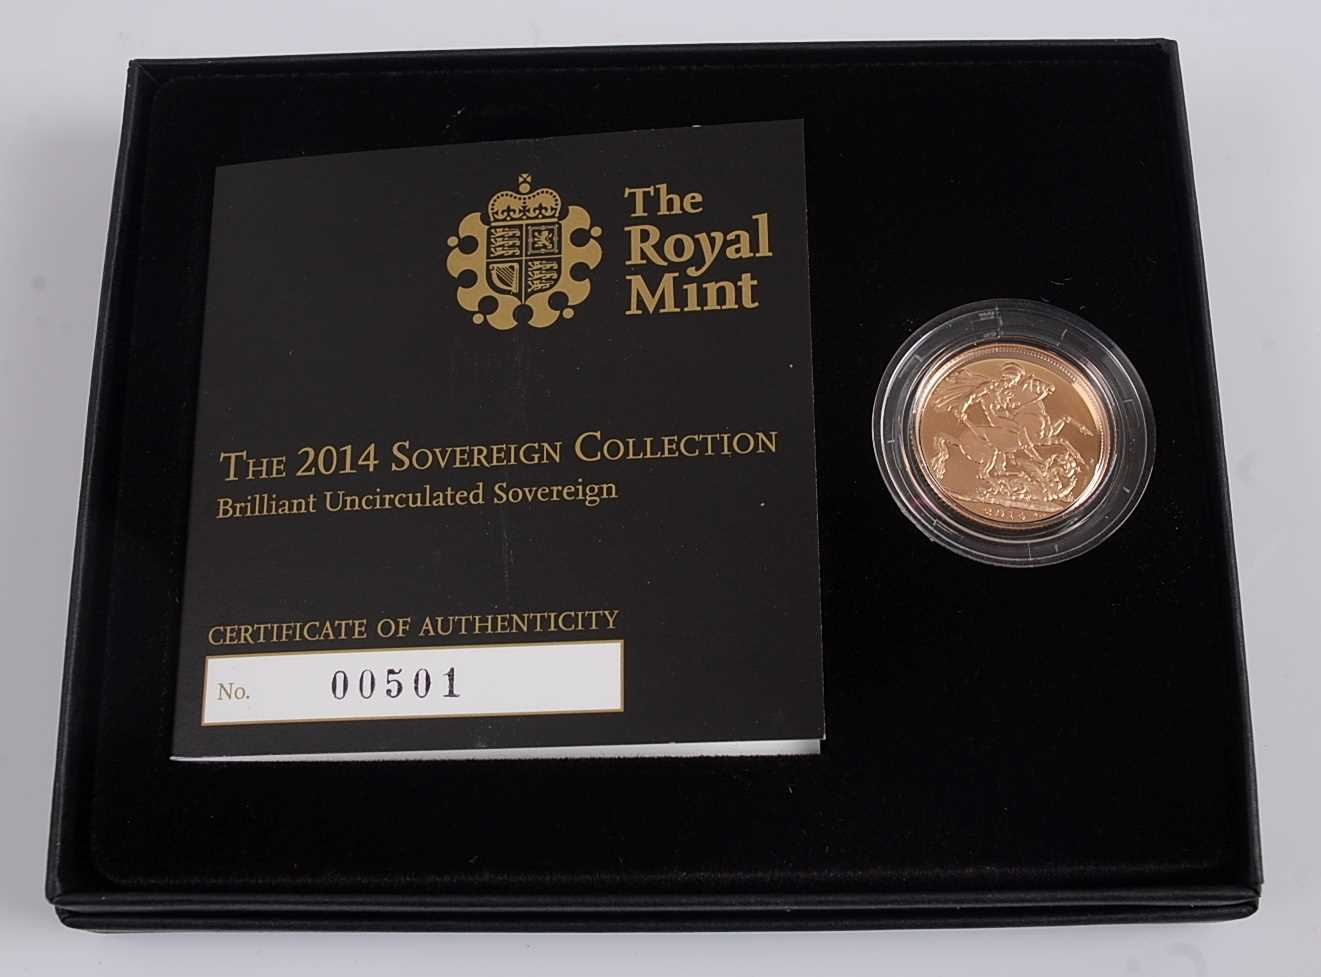 Lot 439 - Great Britain, 2014 gold full sovereign